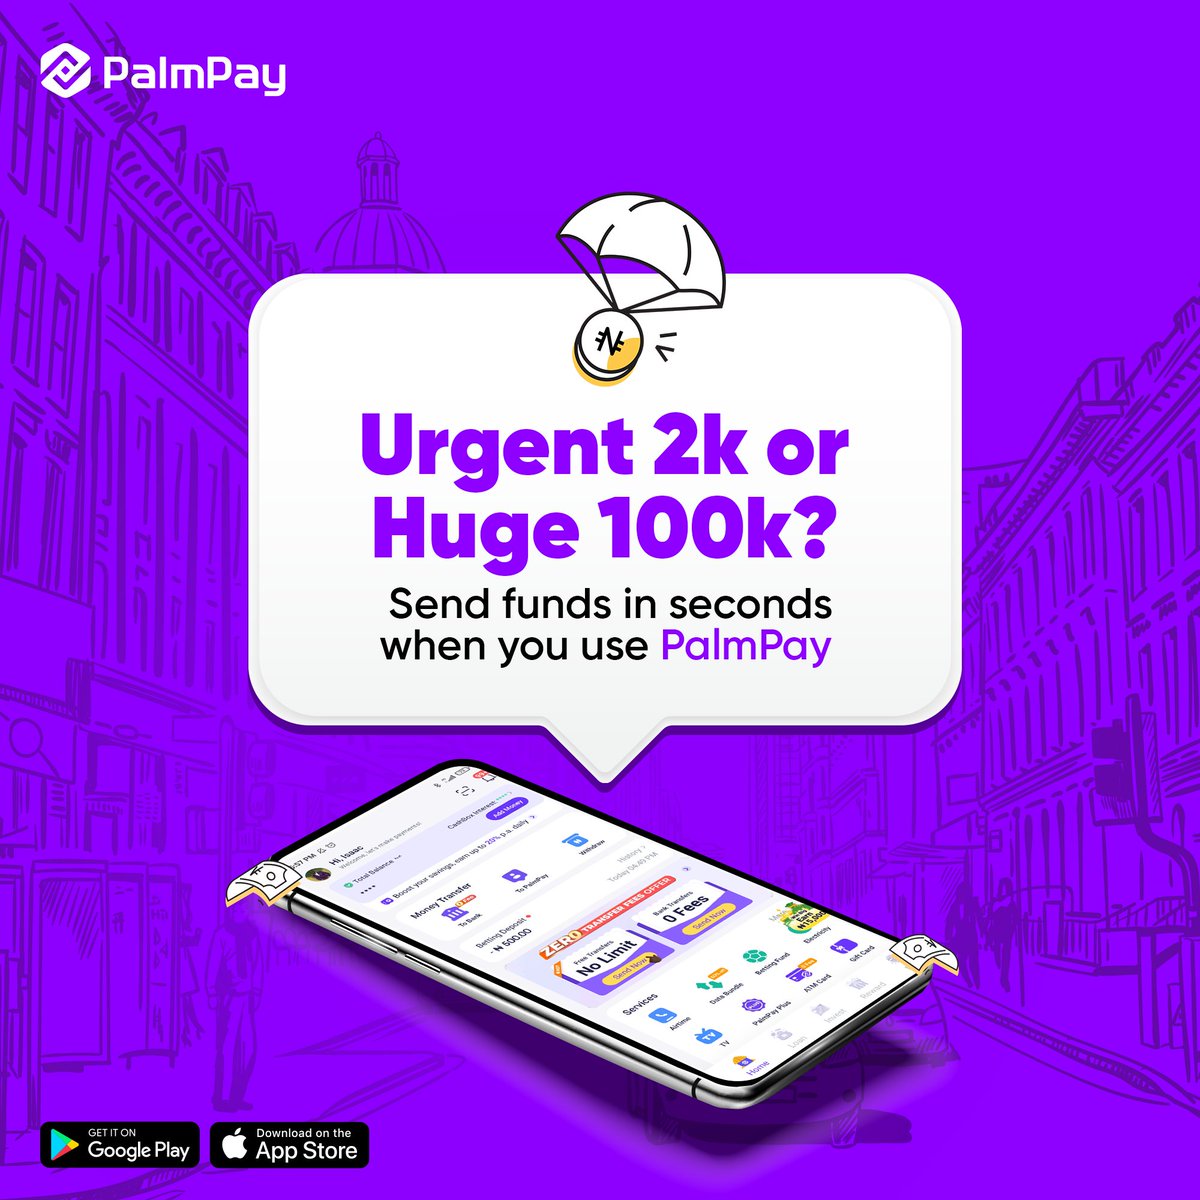 Send and receive funds in SECONDS when you use PalmPay no matter the volume. Whether the transactions are small, large, or extremely large, PalmPay has you covered. Download the PalmPay app here to get started: bit.ly/DownloadPalmPay #PalmPay